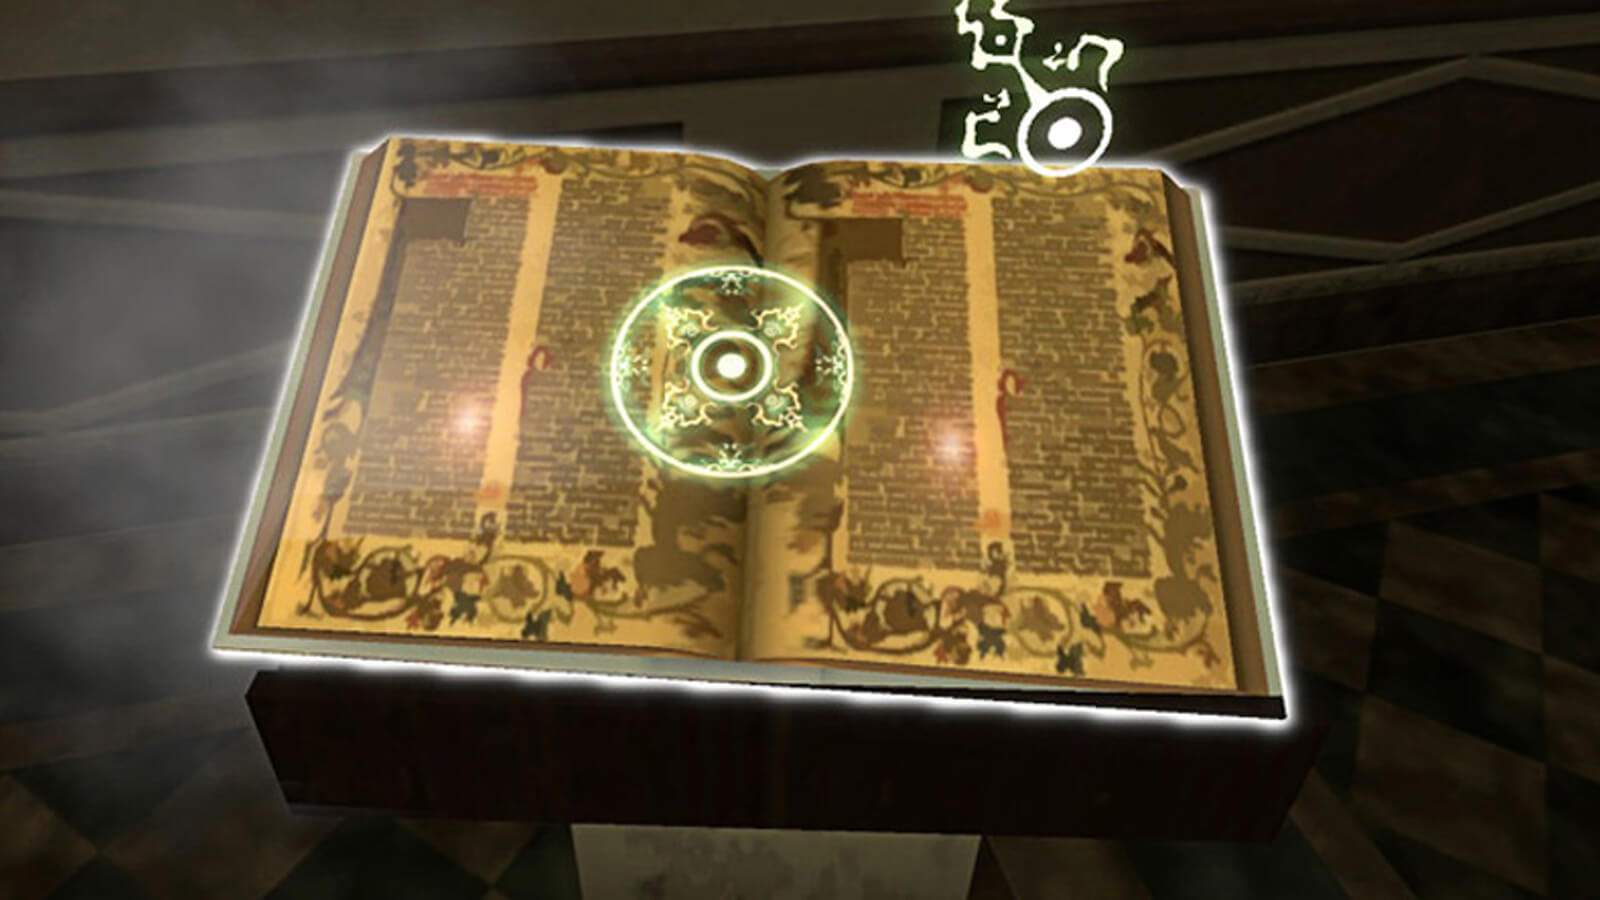 A thick, weathered book is opened to a page of illuminated text. A magically glowing green rune floats above it.